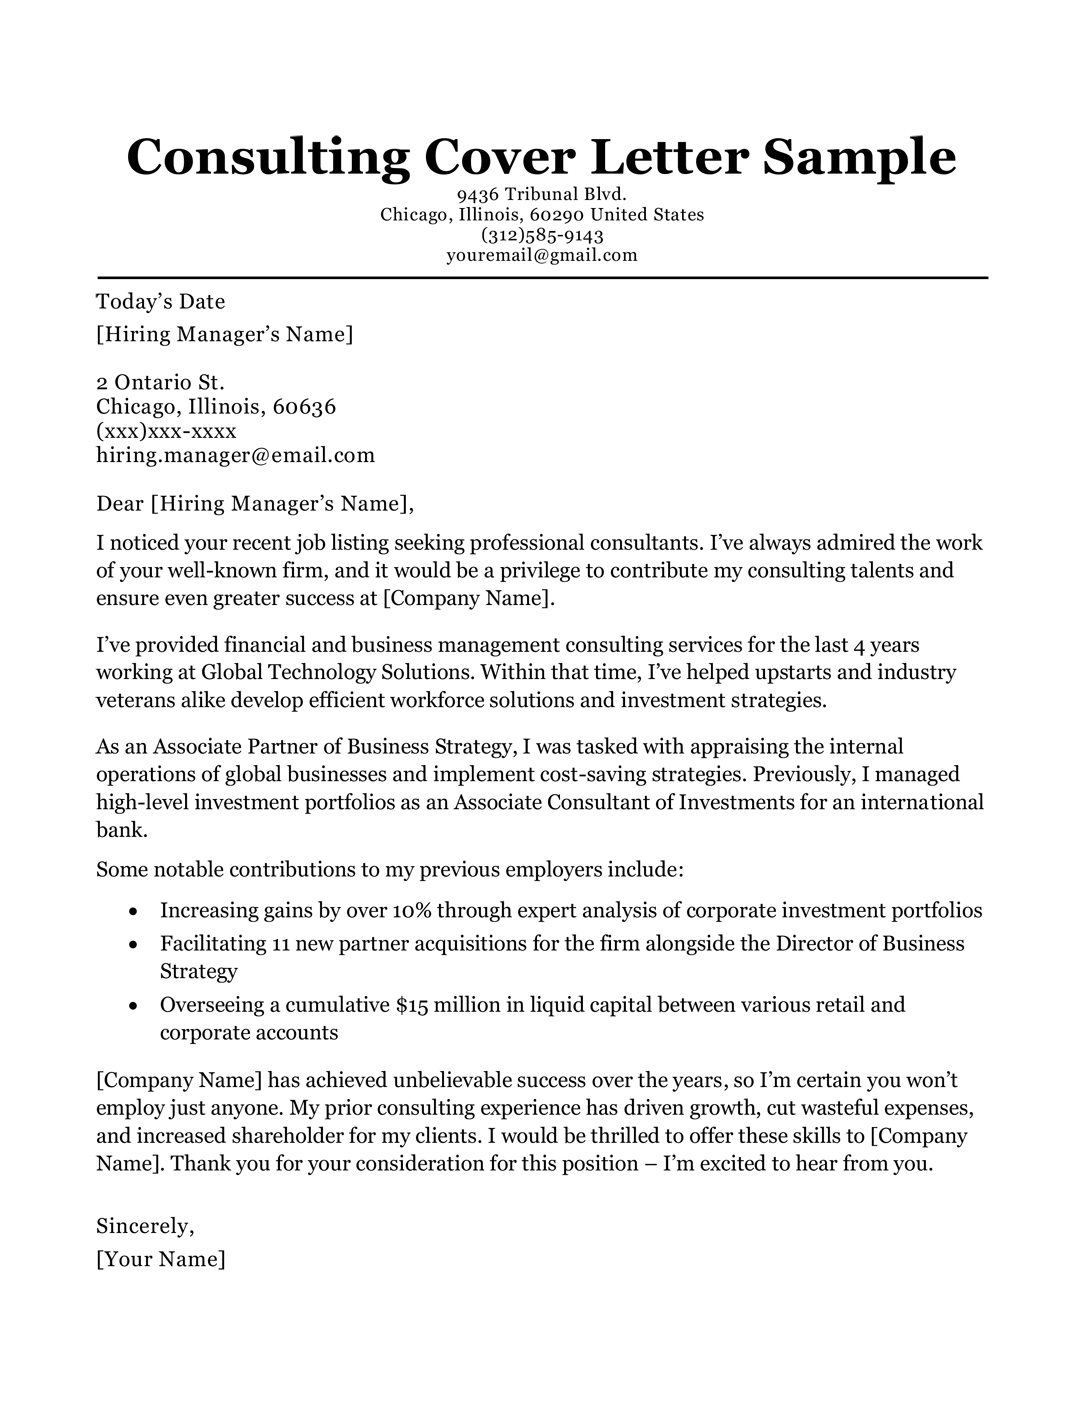 Consulting cover letter sample